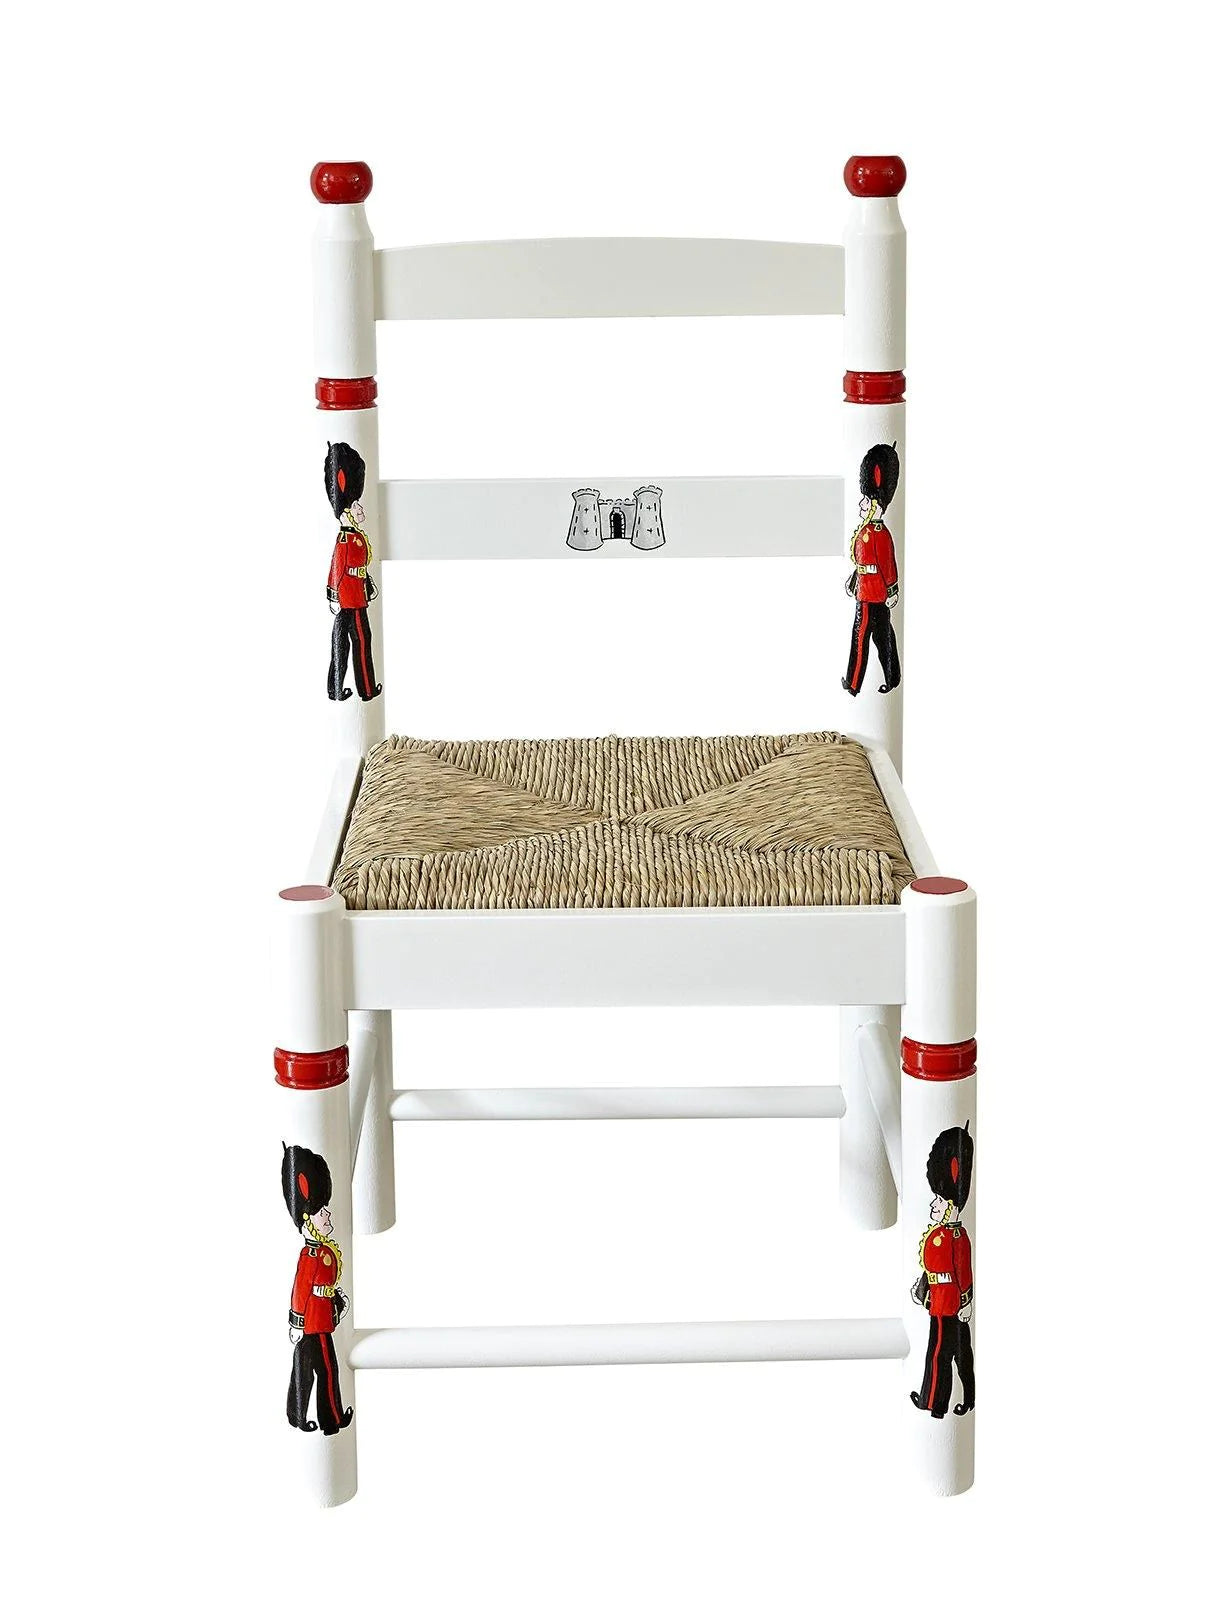 Dragons Rush Seated Chair - Terry's Soldiers with Soldier Red Trim